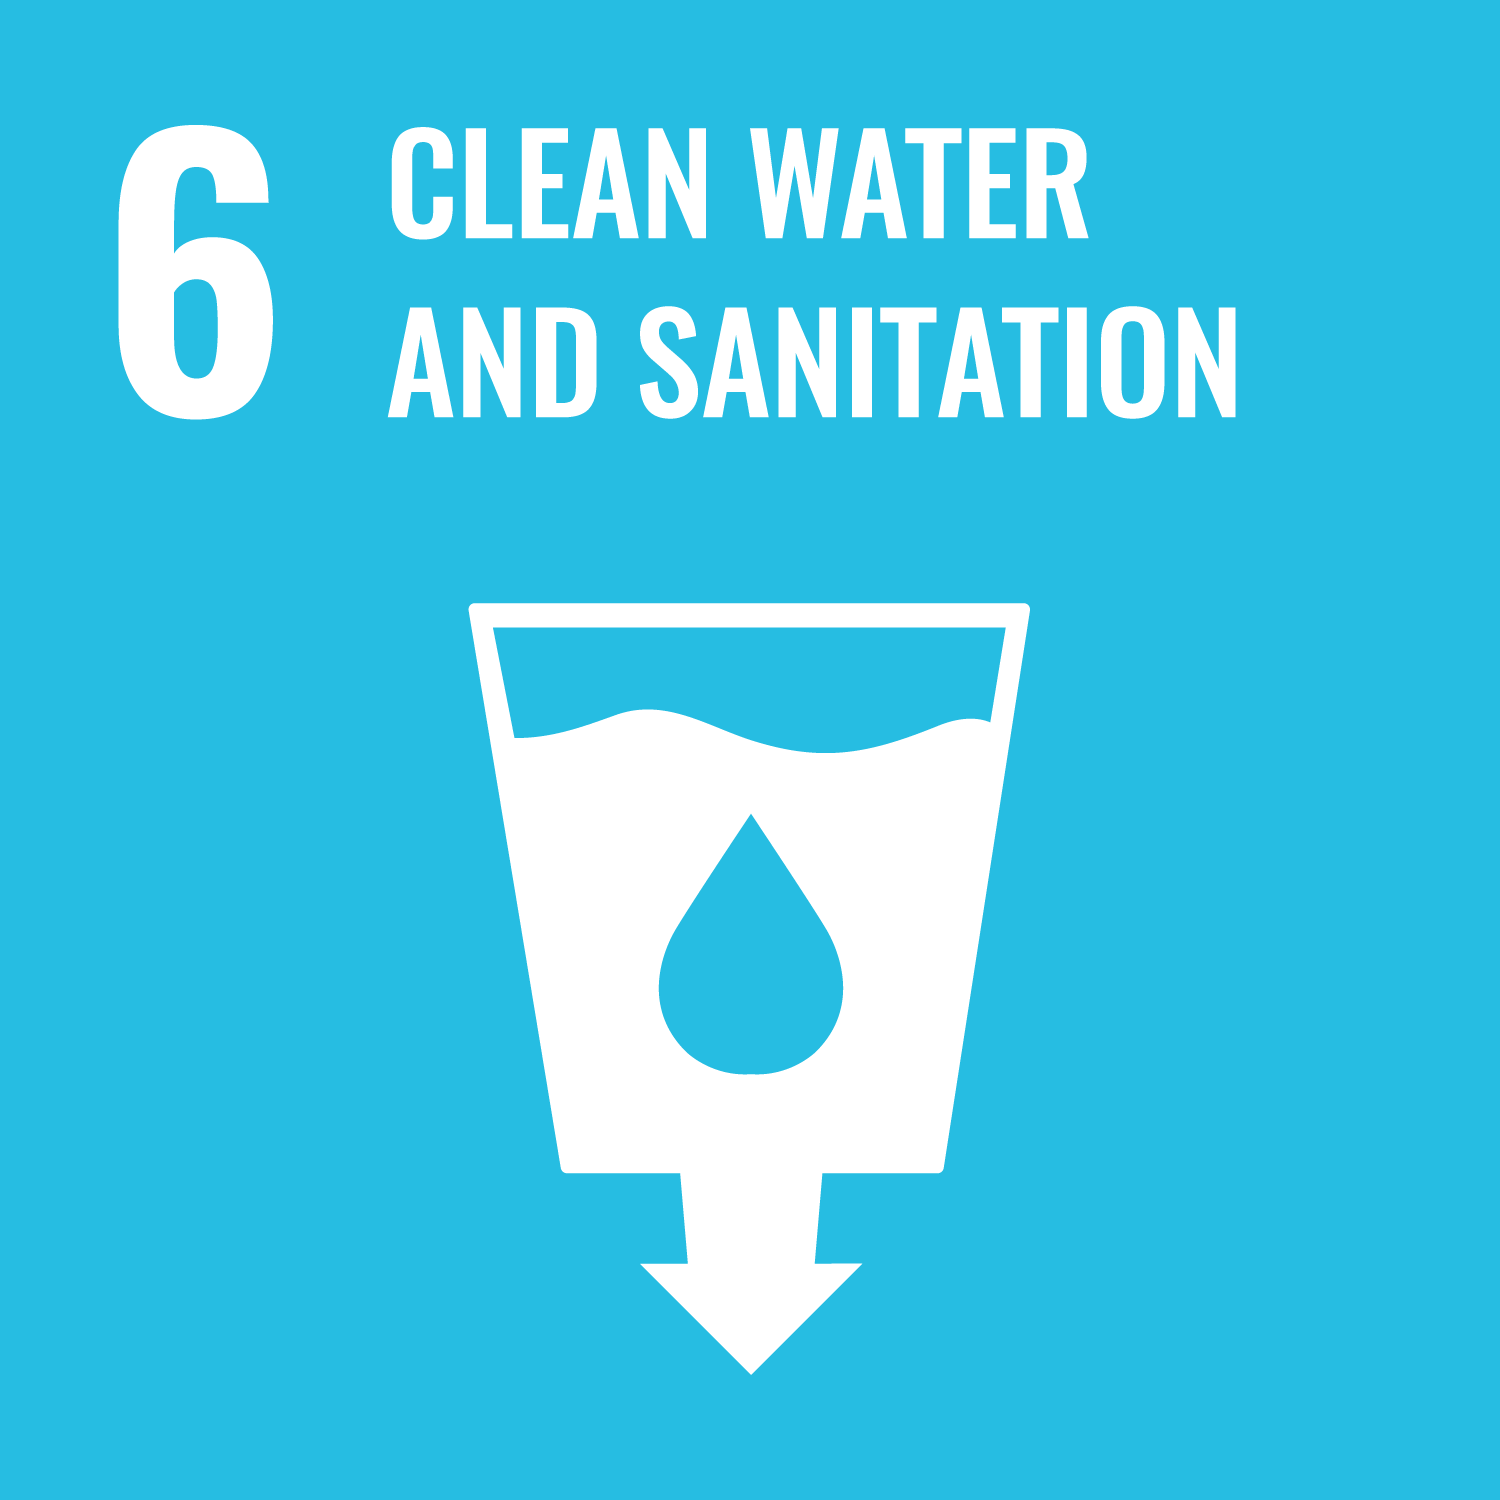 United Nations Sustainable Development Goal Number 6: Clean Water and Sanitation